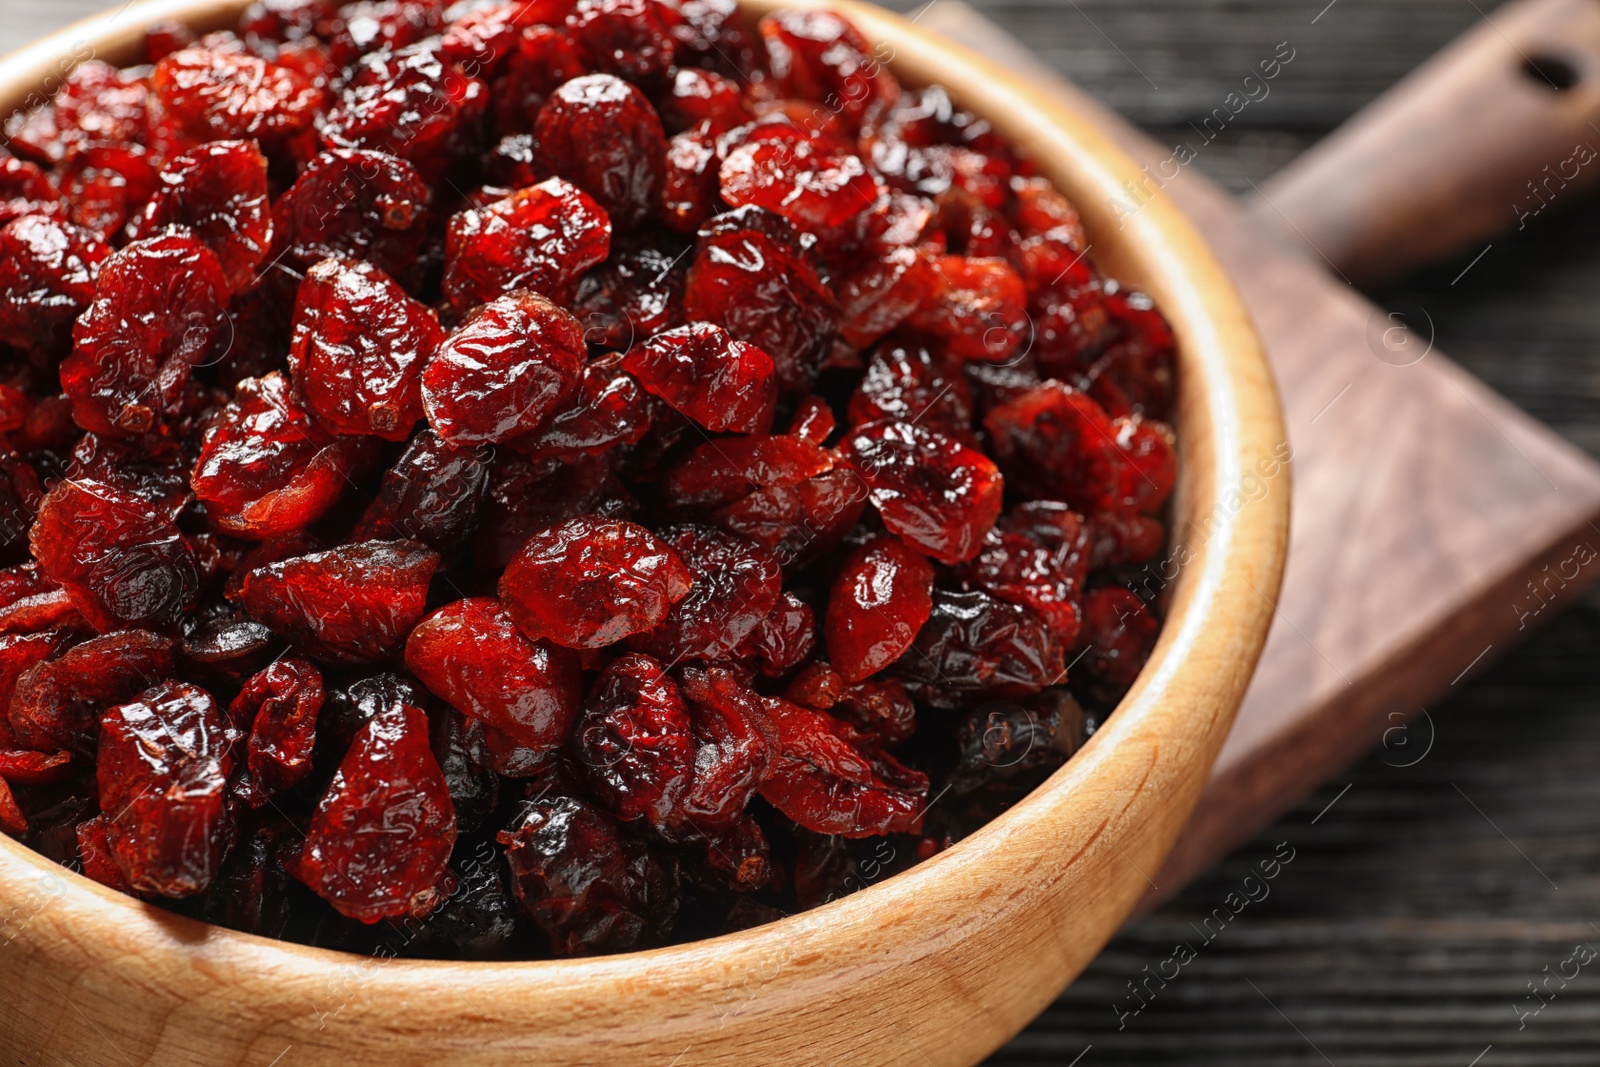 Photo of Bowl with cranberries on wooden table, closeup. Dried fruit as healthy snack